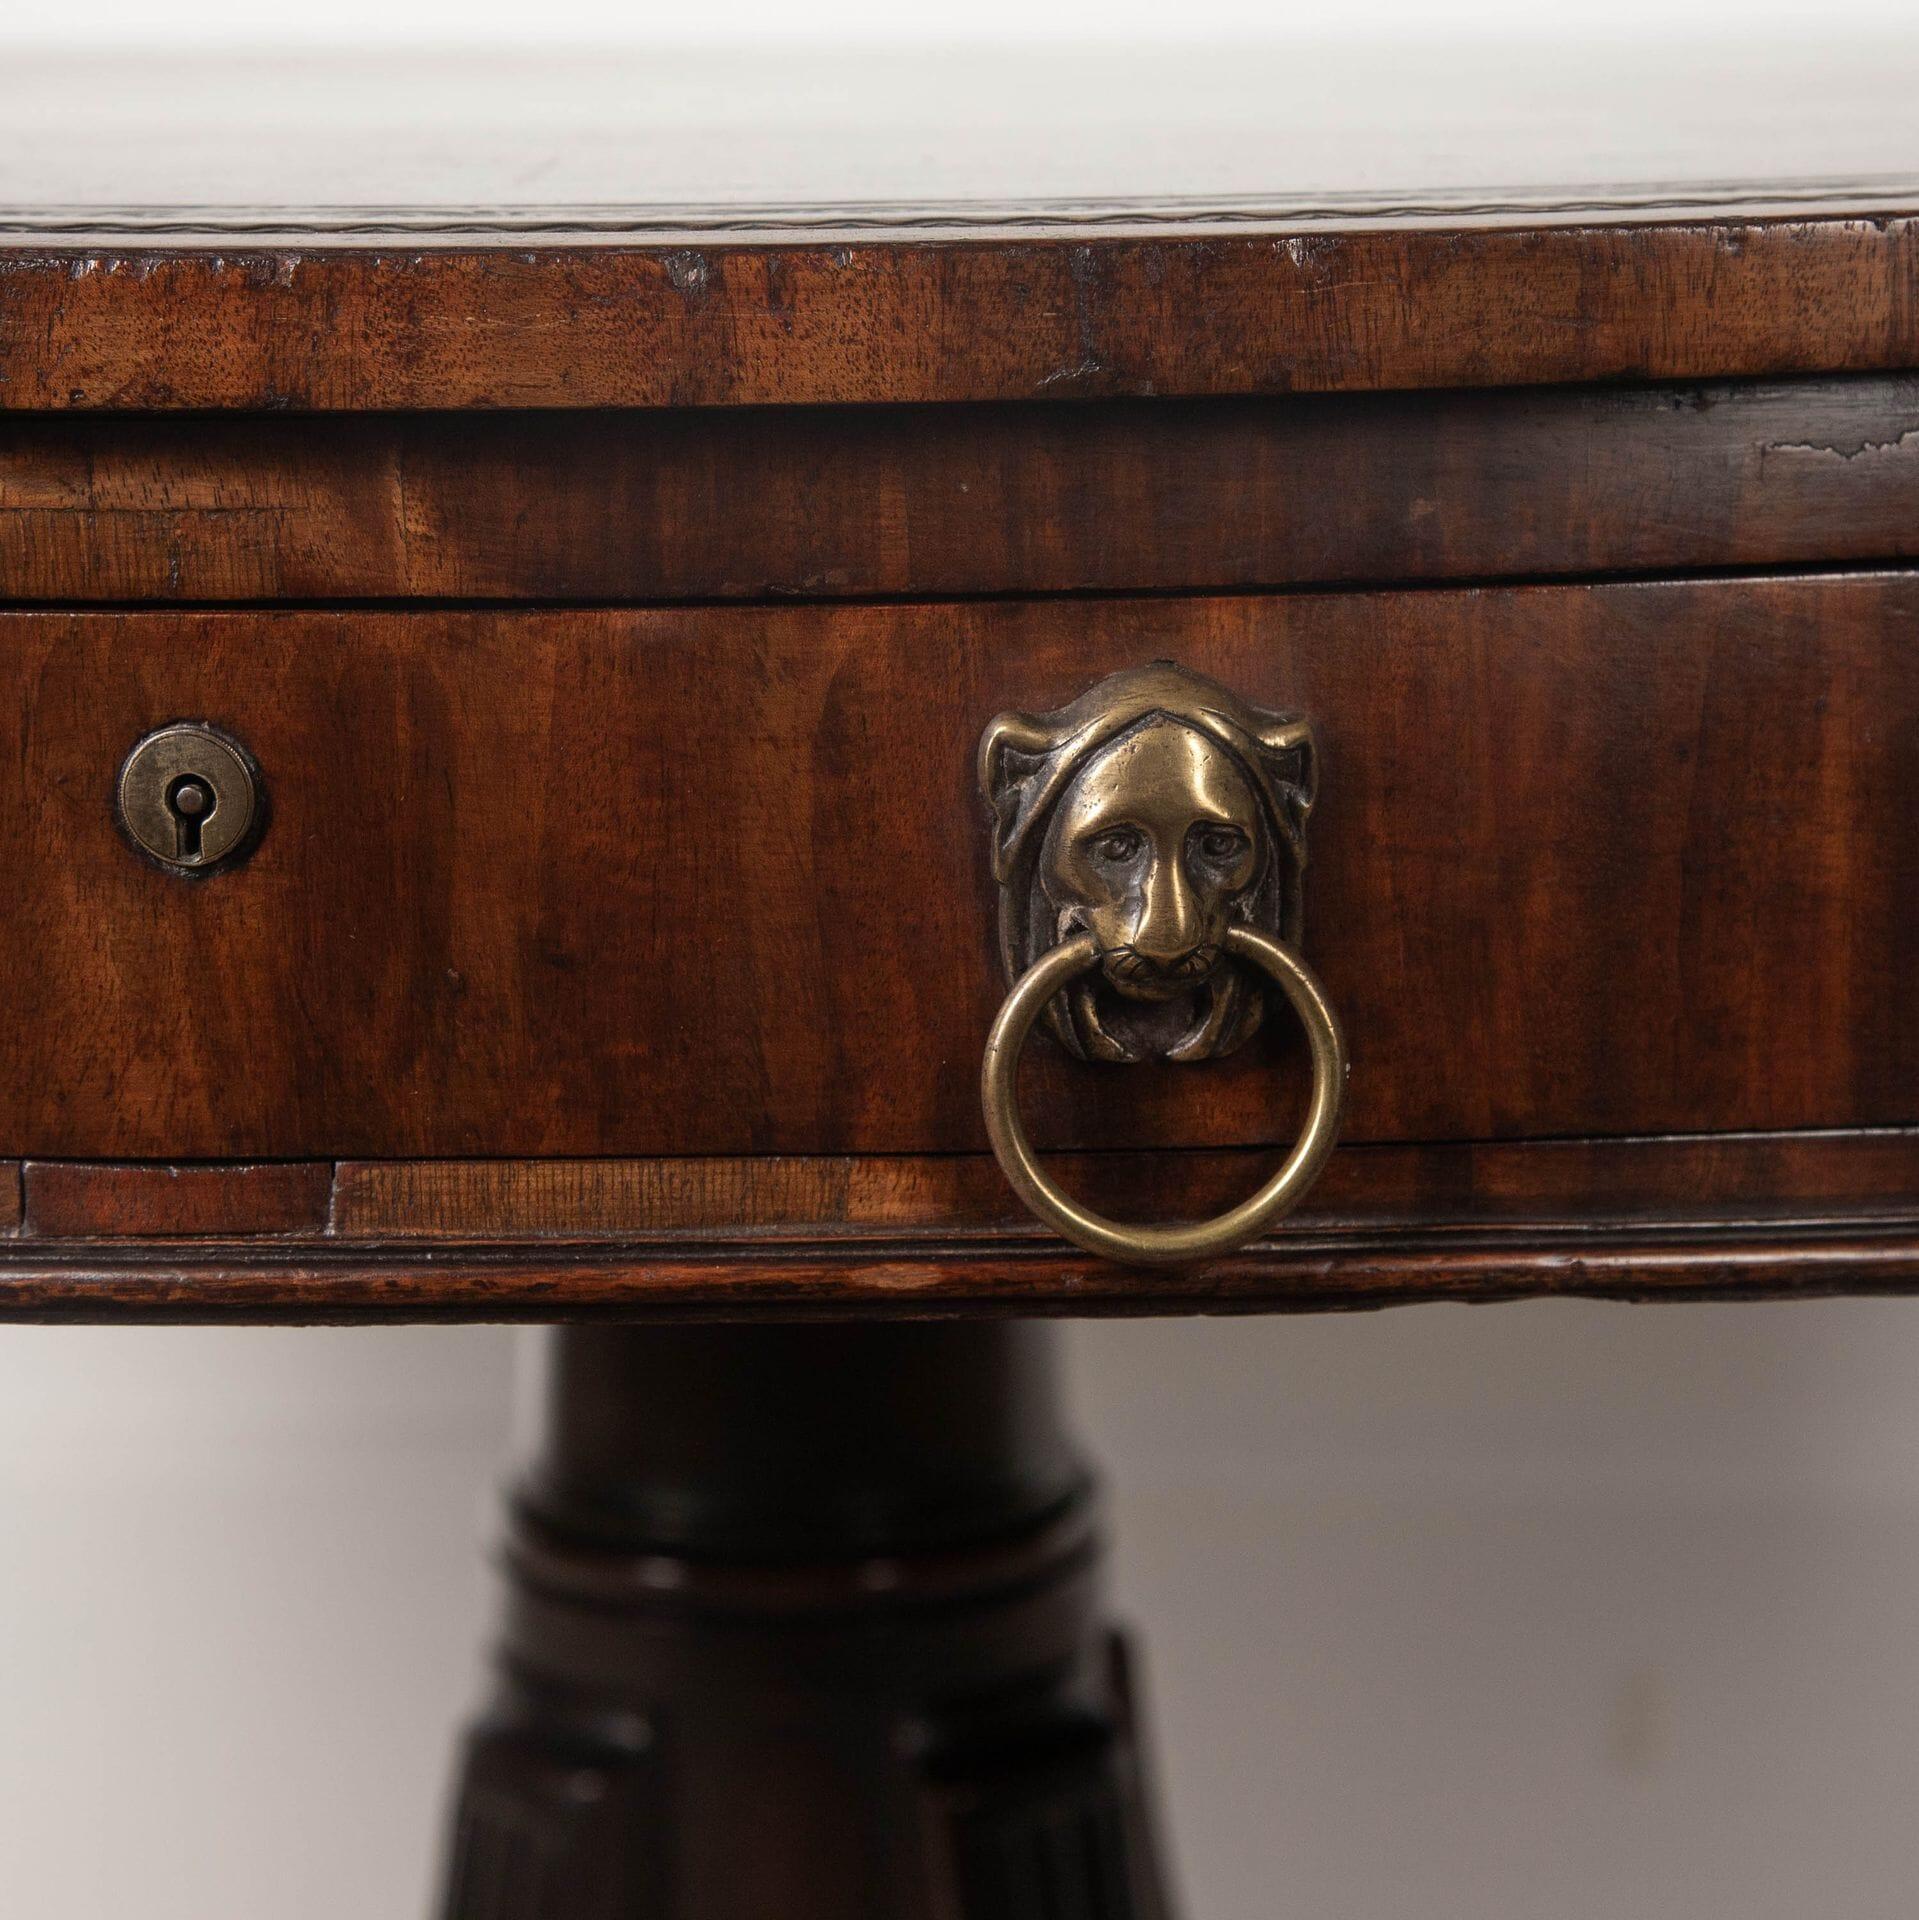 Early 19th Century Regency Mahogany Drum Table For Sale